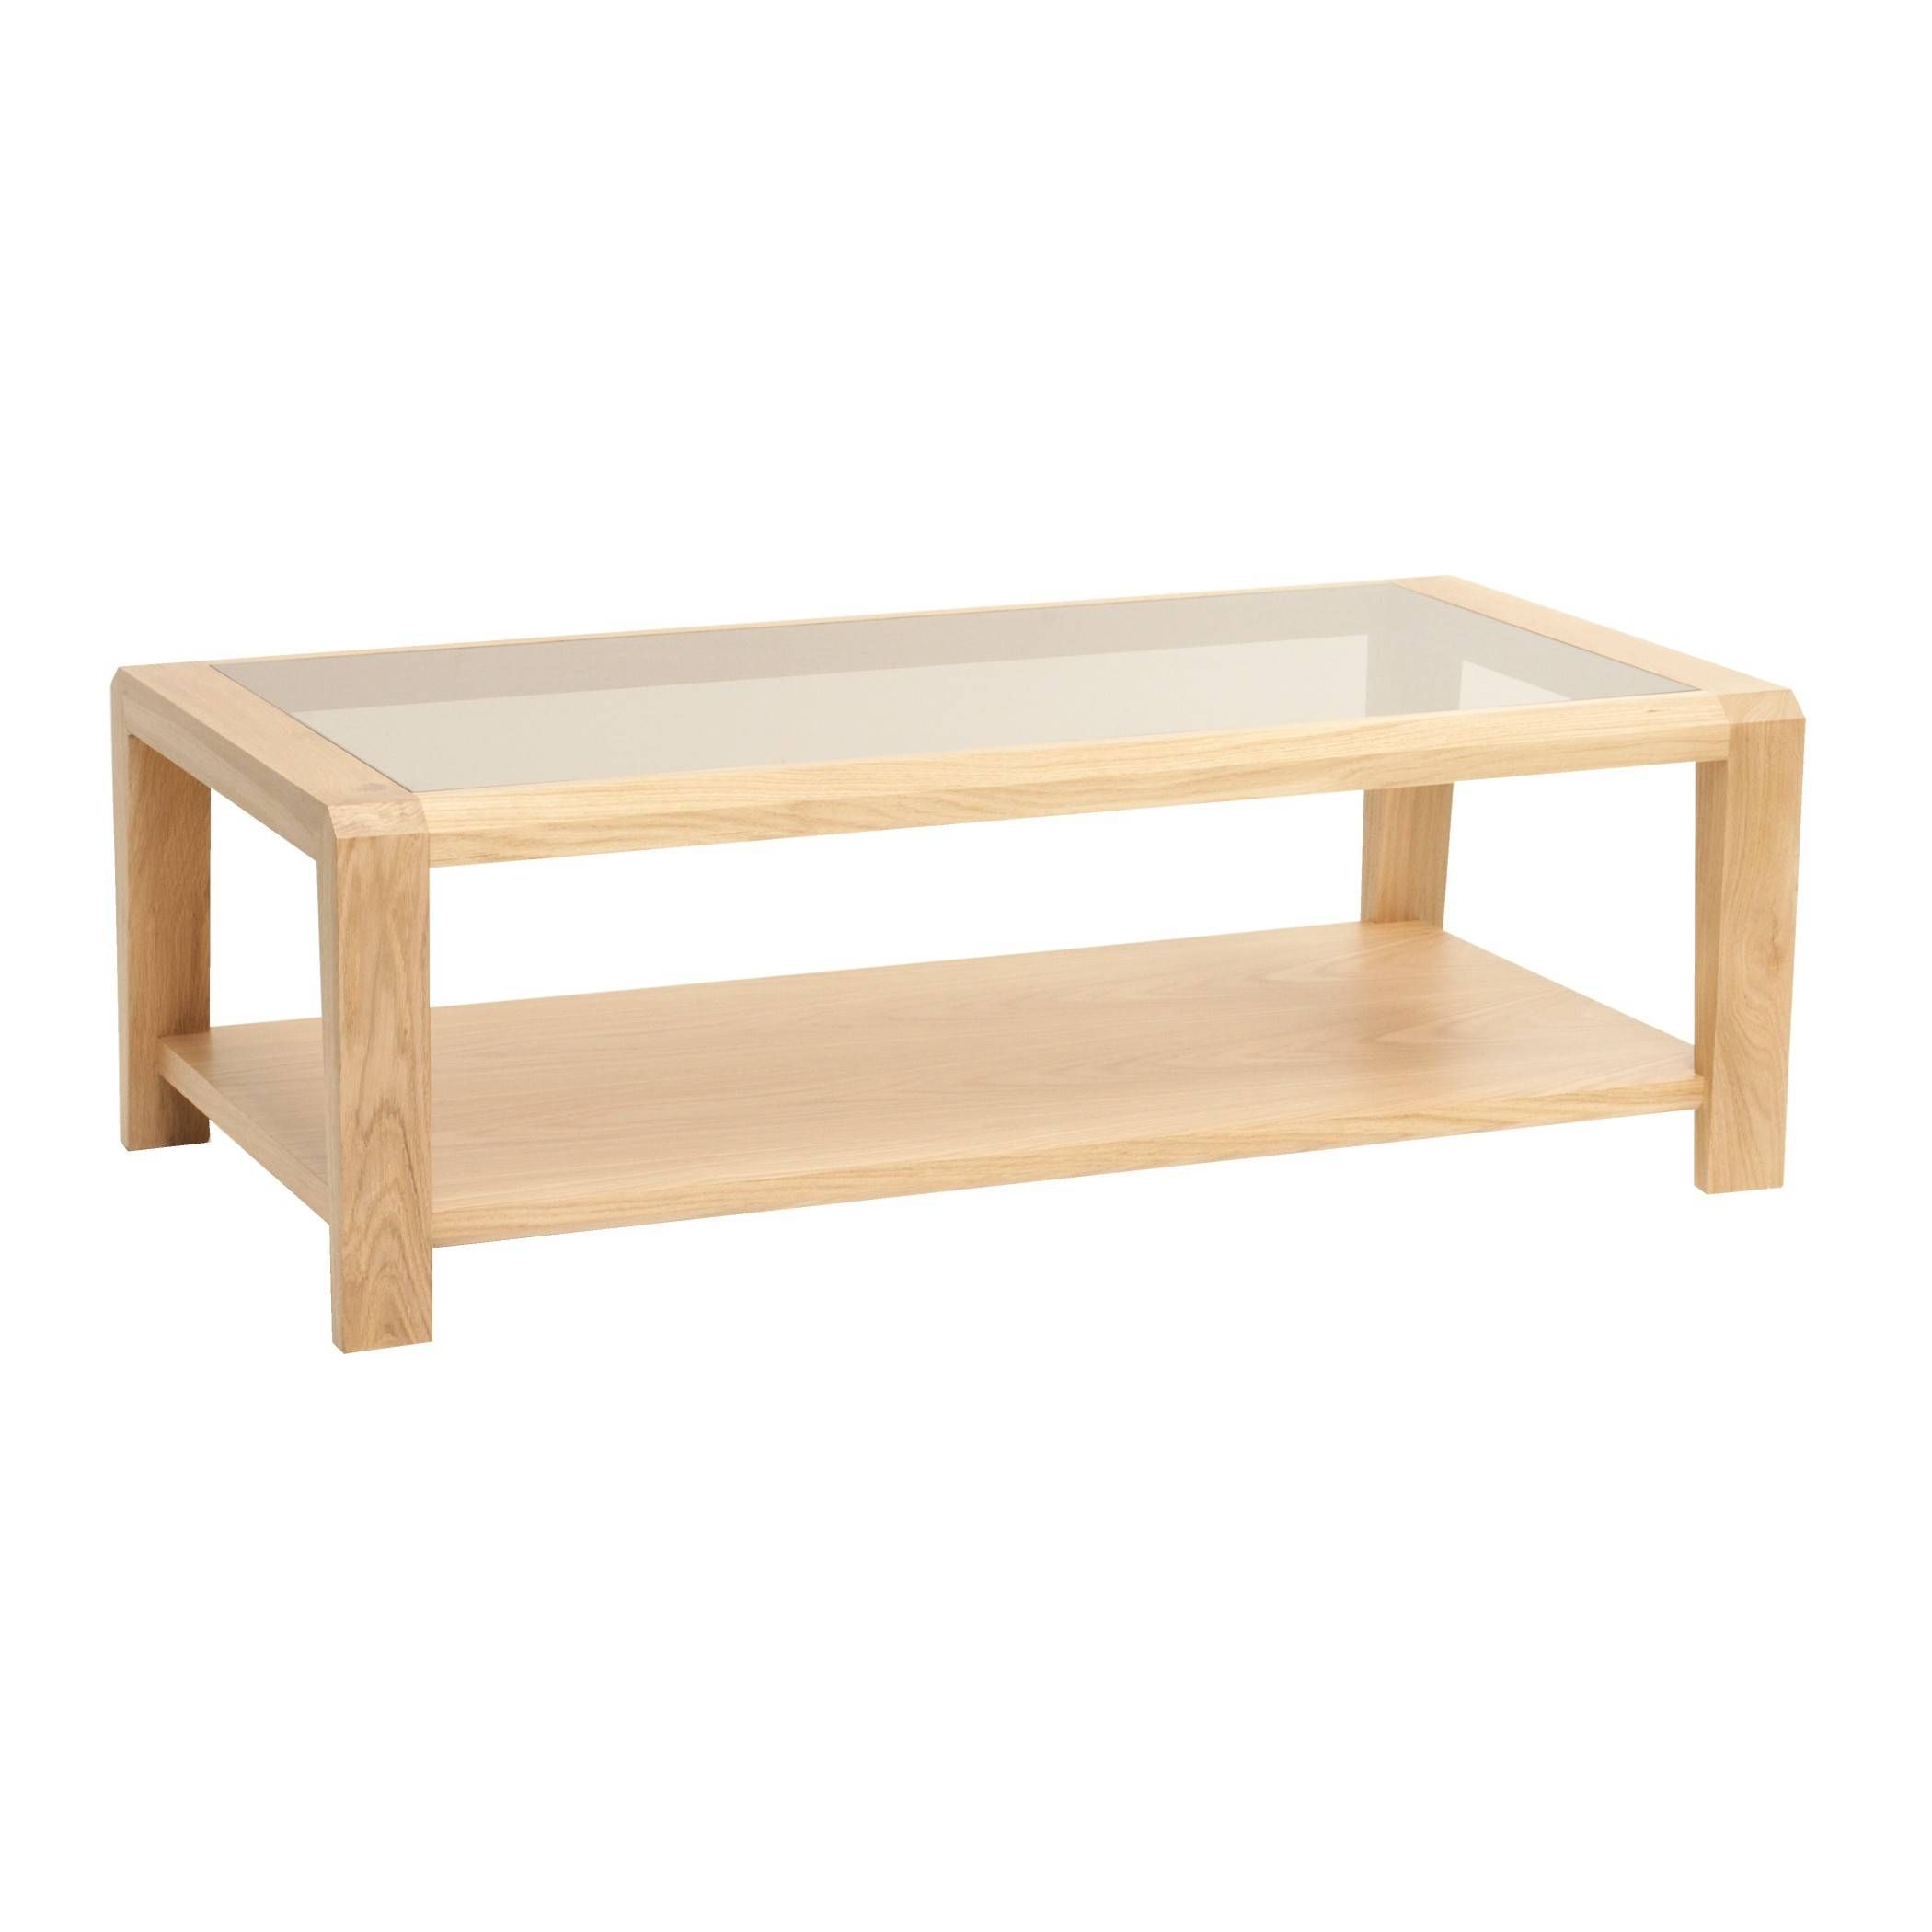 Oak Coffee Table With Glass Top And Shelf | Gola Furniture Uk Inside Glass Oak Coffee Tables (Photo 1 of 15)